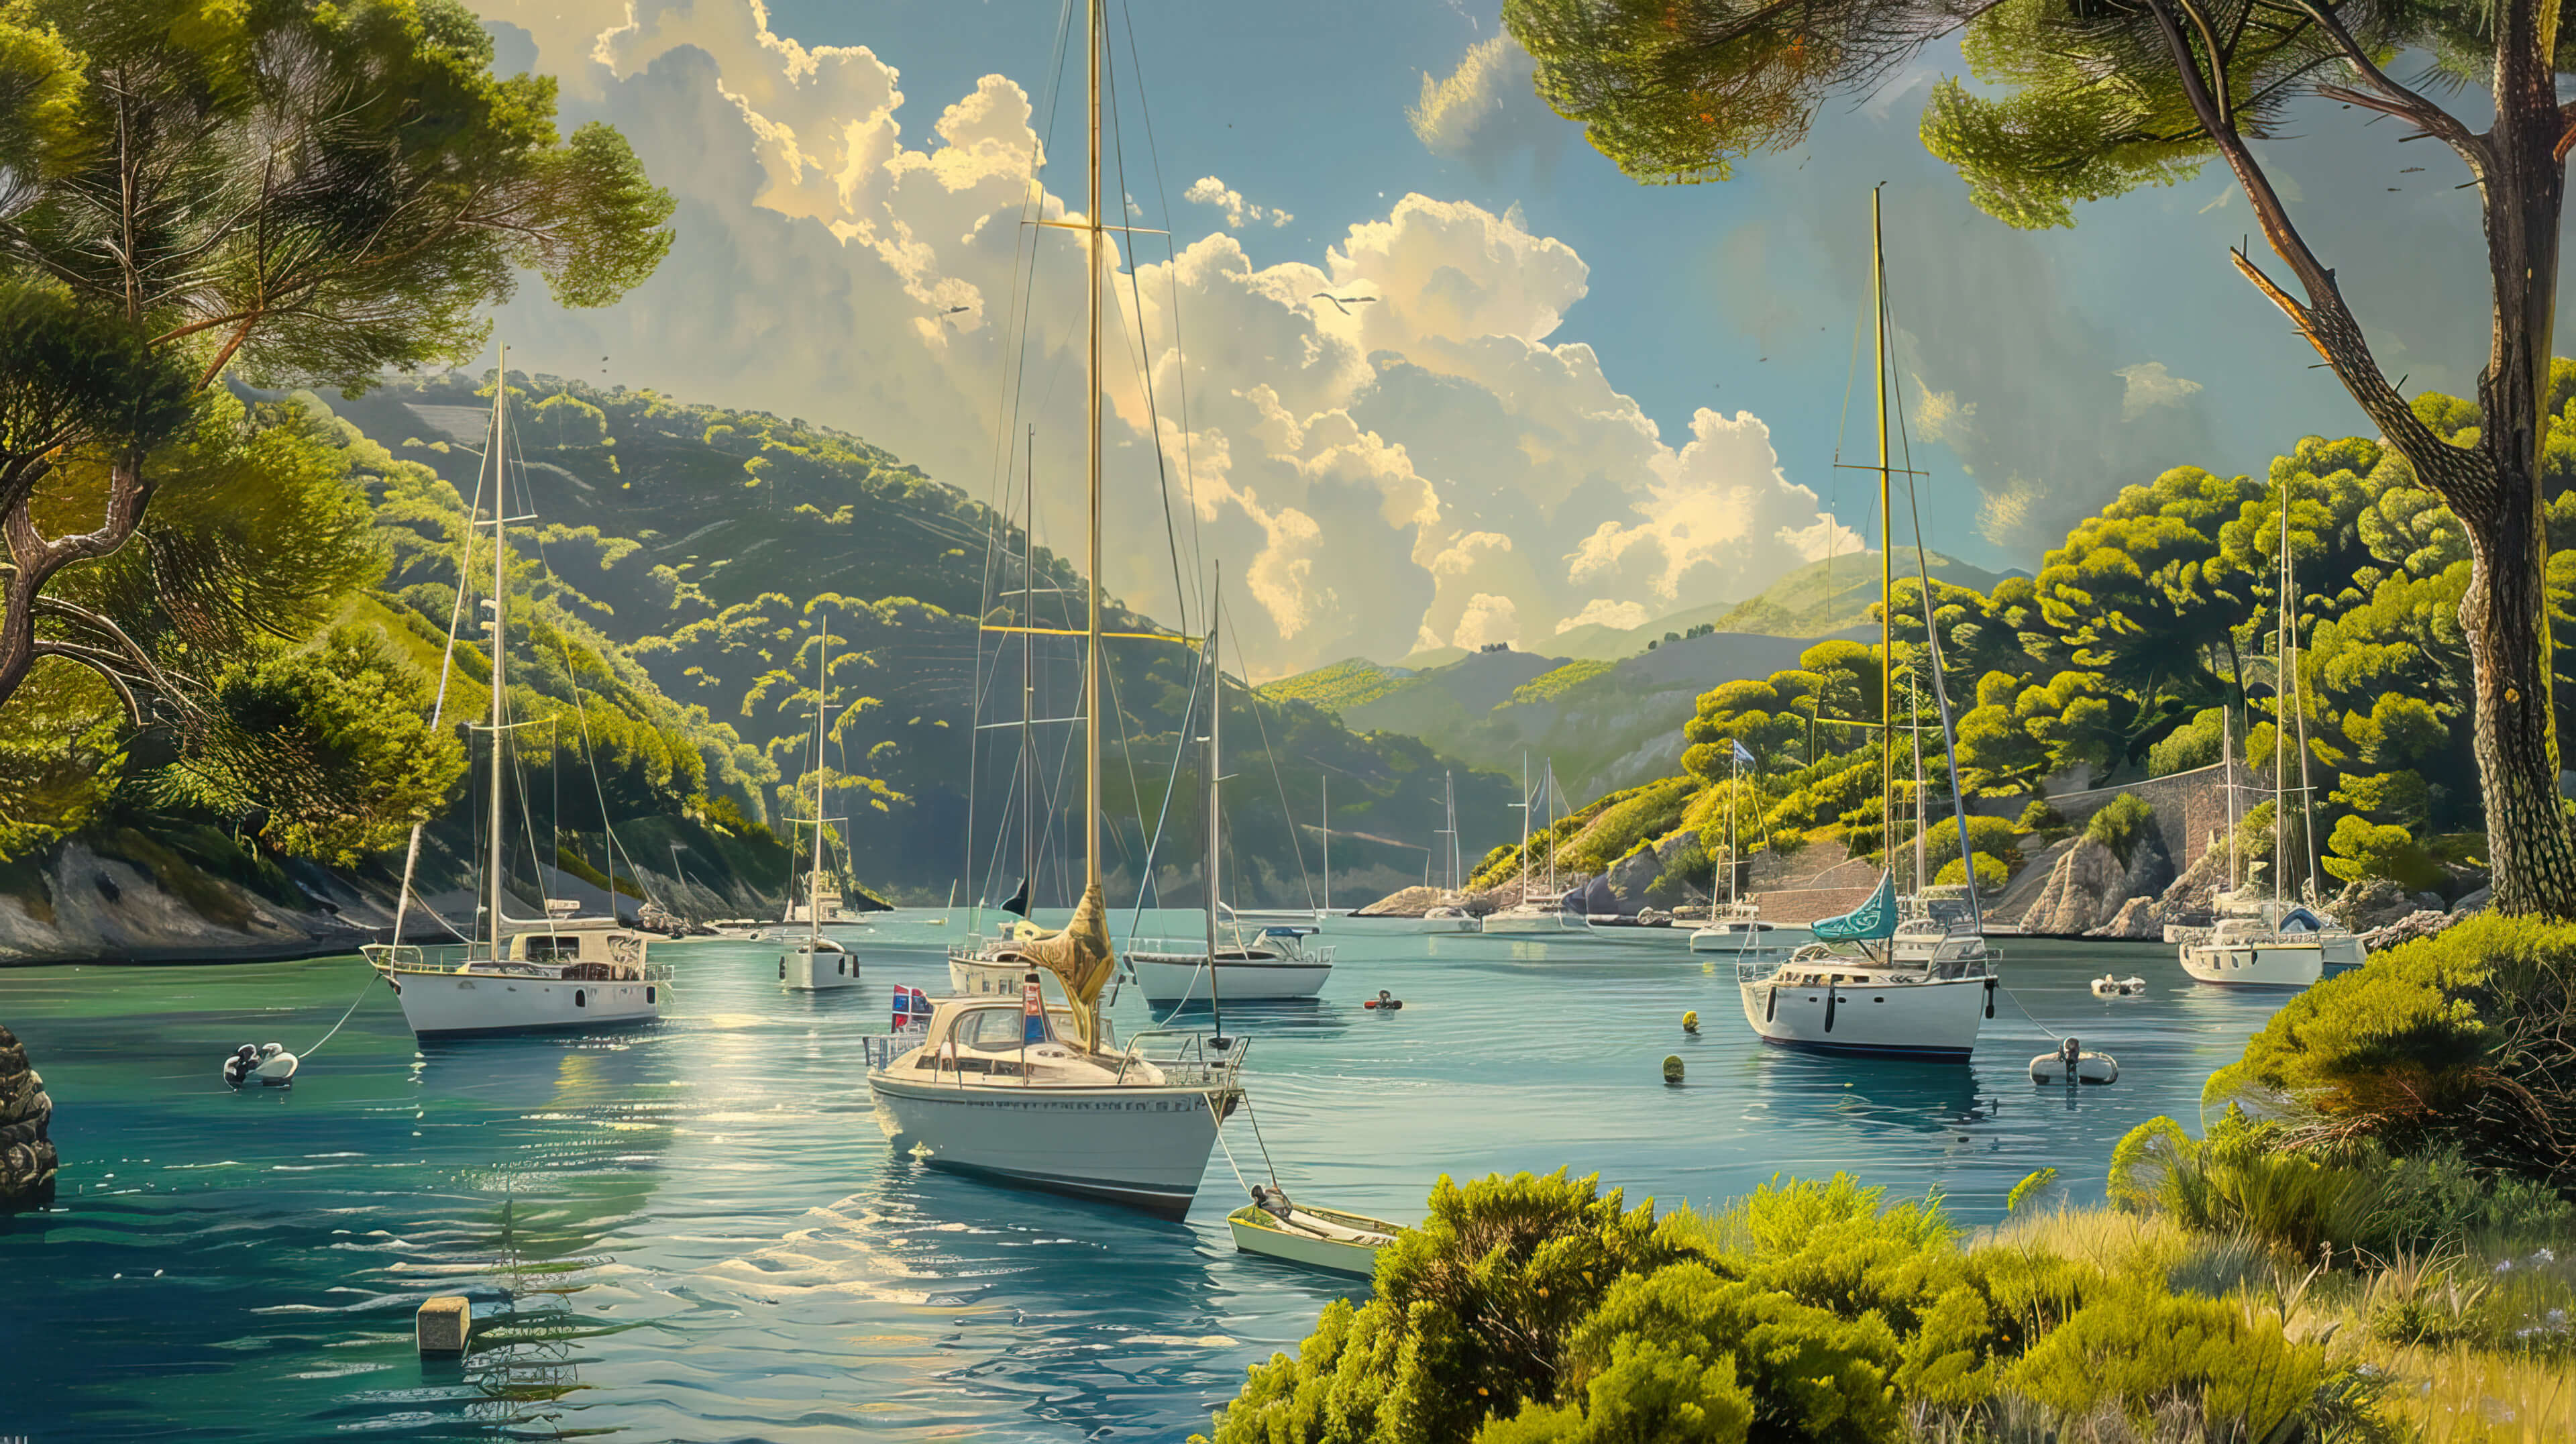 Sailboats peacefully dot a tranquil bay with their towering masts set against a backdrop of verdant hills and vivid blue waters in this wallpaper